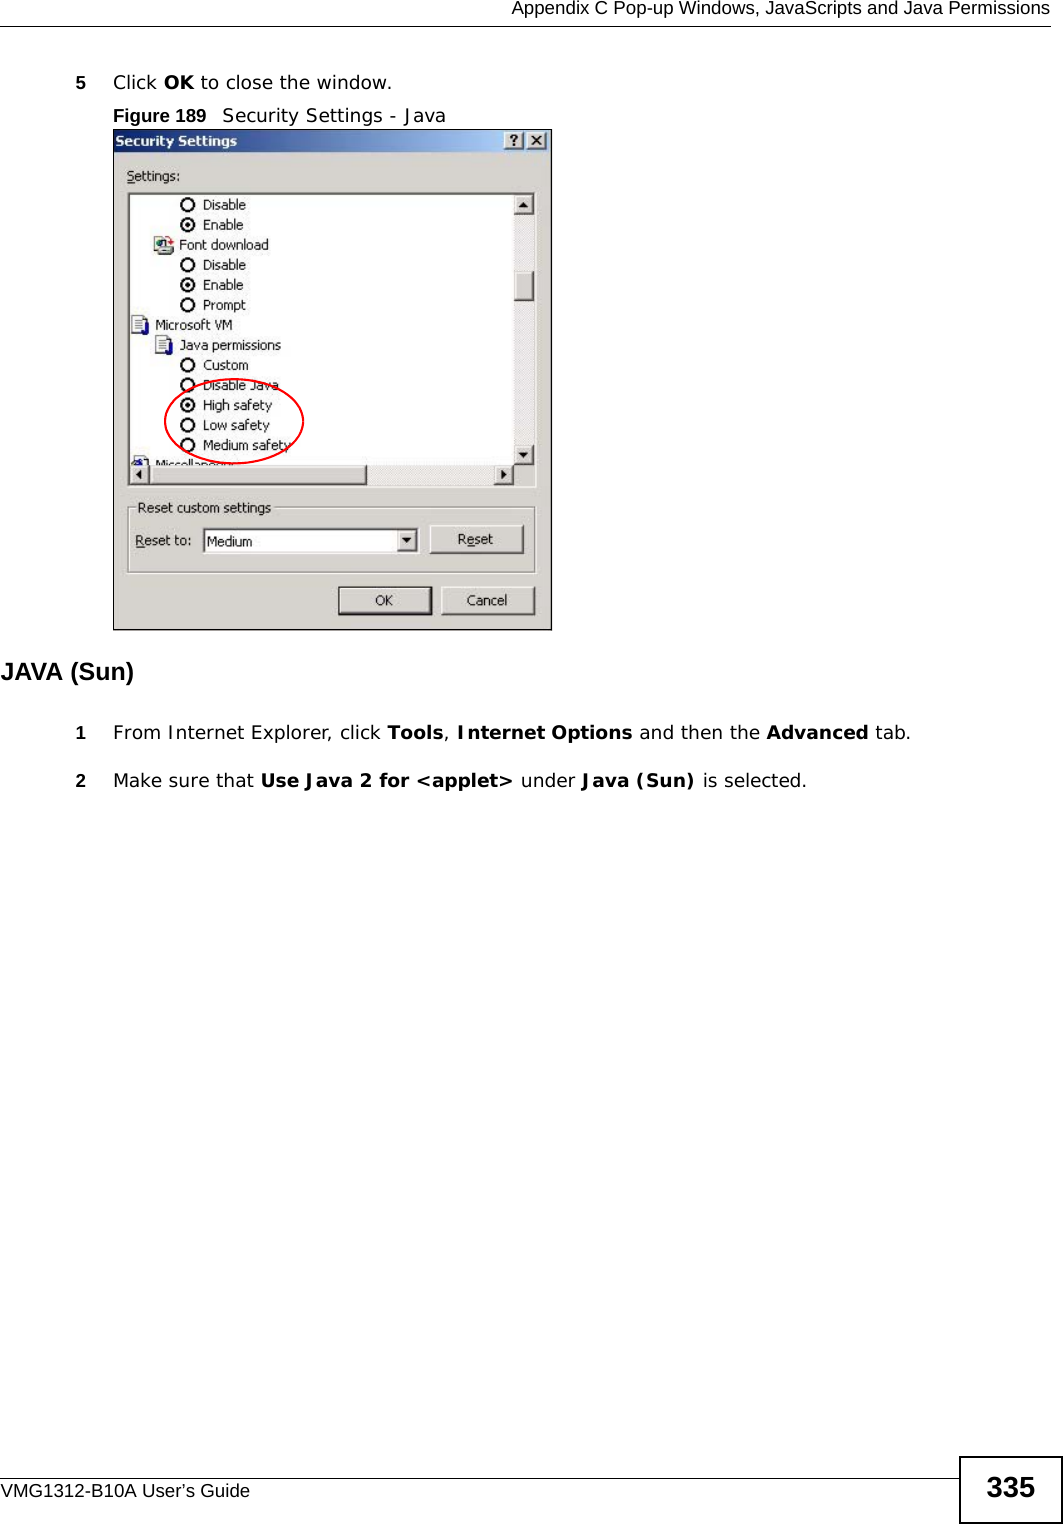  Appendix C Pop-up Windows, JavaScripts and Java PermissionsVMG1312-B10A User’s Guide 3355Click OK to close the window.Figure 189   Security Settings - Java JAVA (Sun)1From Internet Explorer, click Tools, Internet Options and then the Advanced tab. 2Make sure that Use Java 2 for &lt;applet&gt; under Java (Sun) is selected.